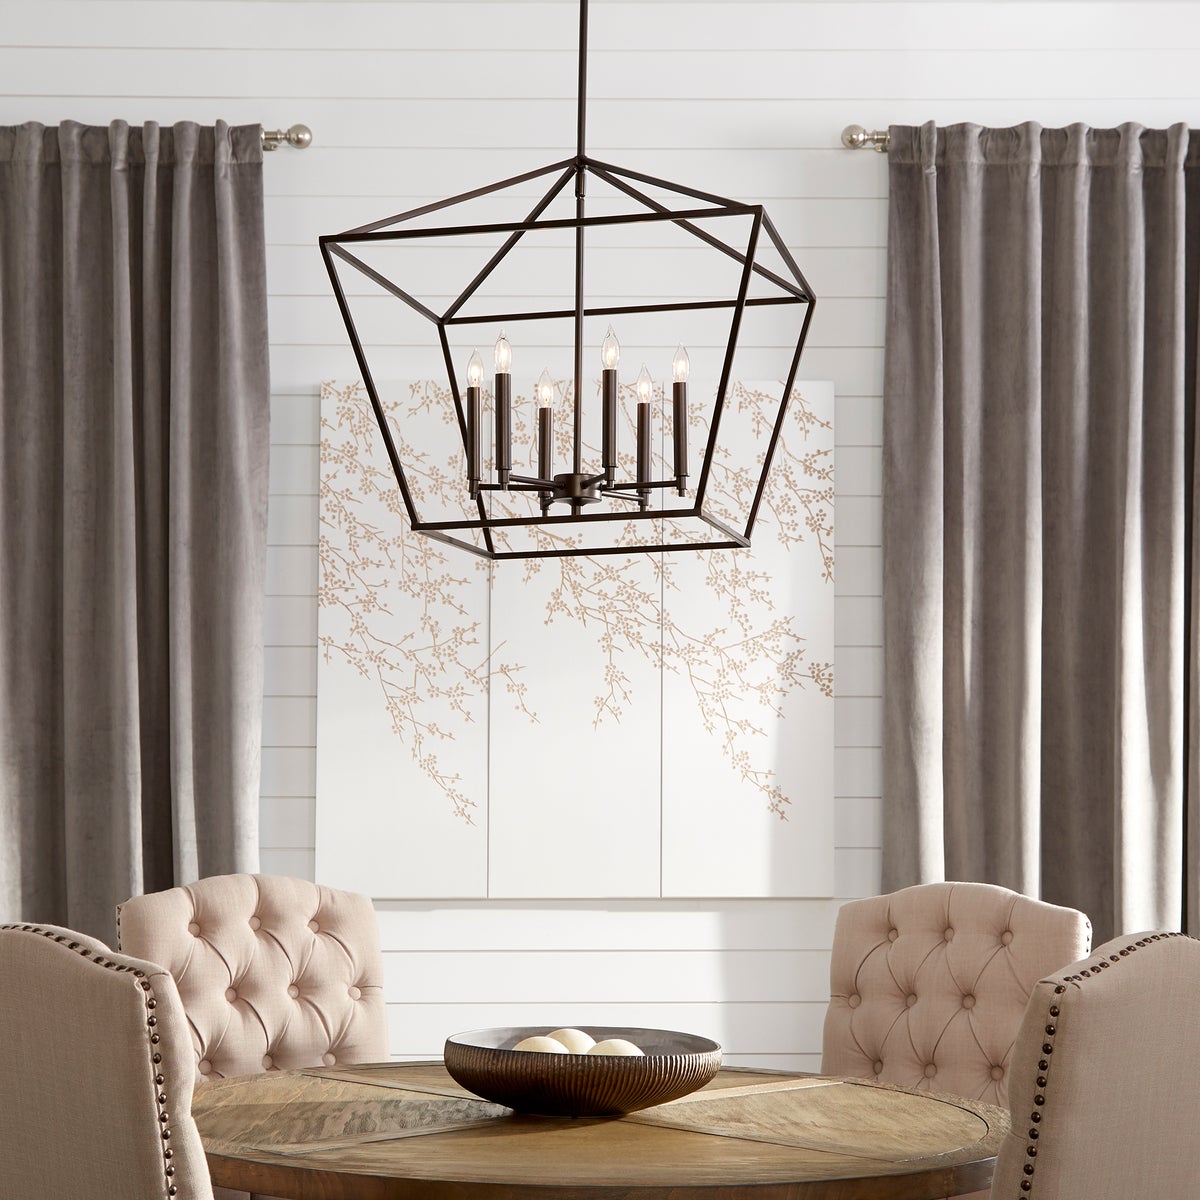 A farmhouse pendant light hangs above a table, providing ample illumination. Perfect for adding farmhouse charm to your space.